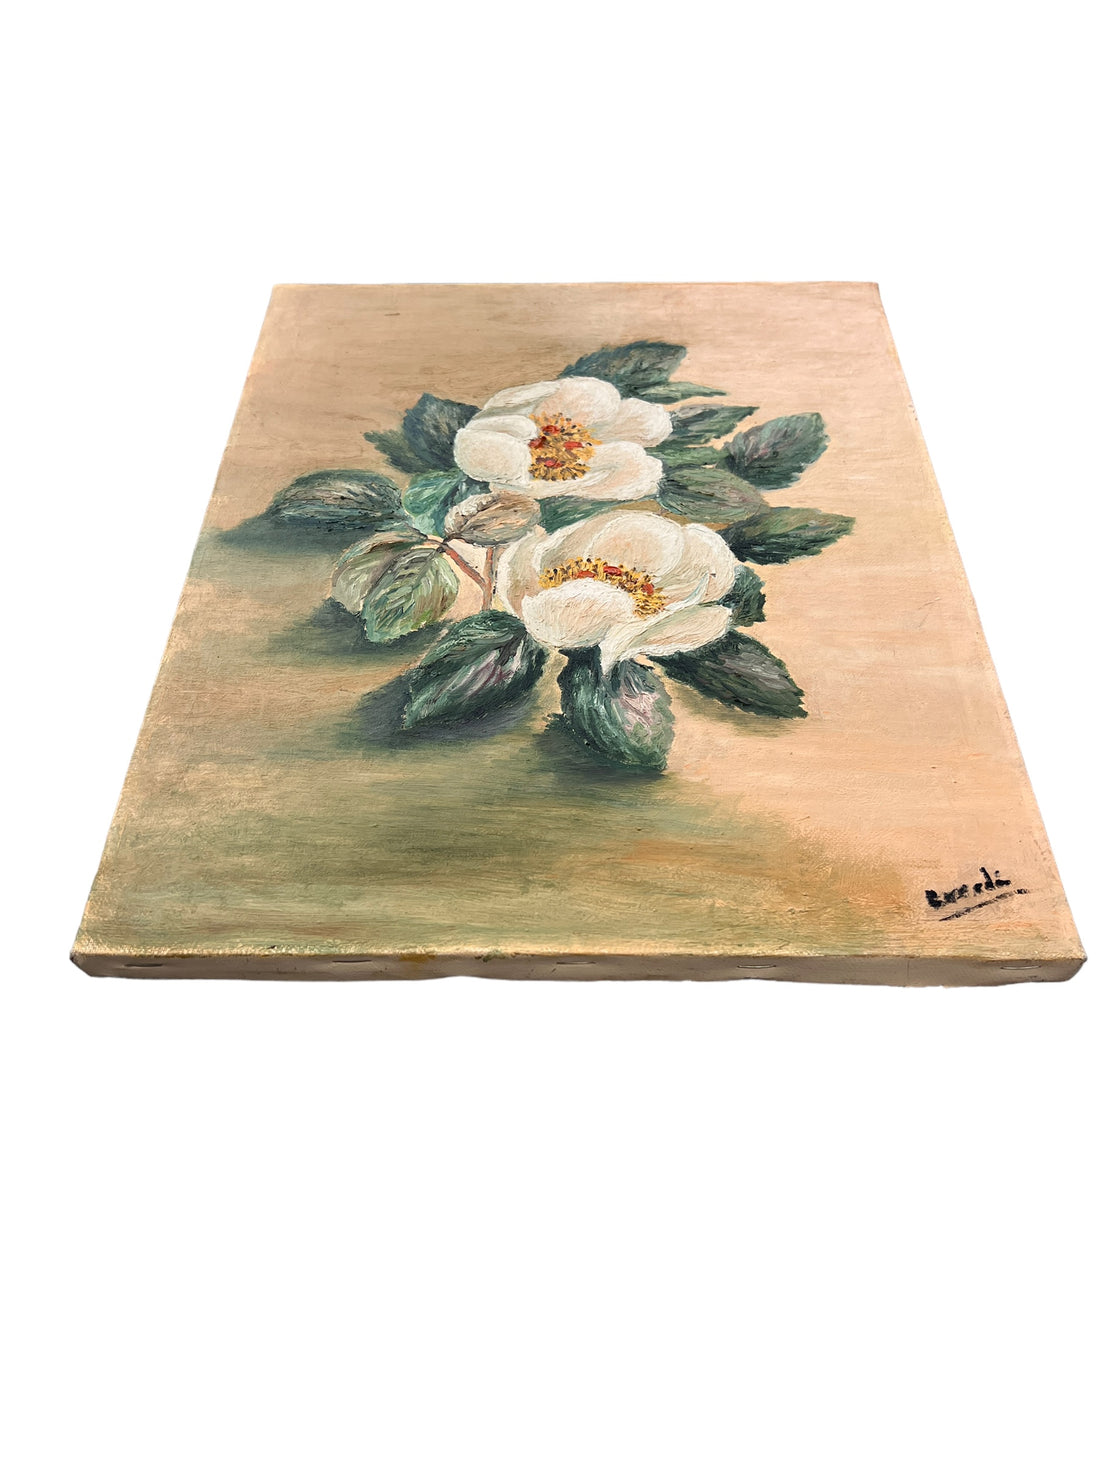 Unframed European Floral Magnolia Painting